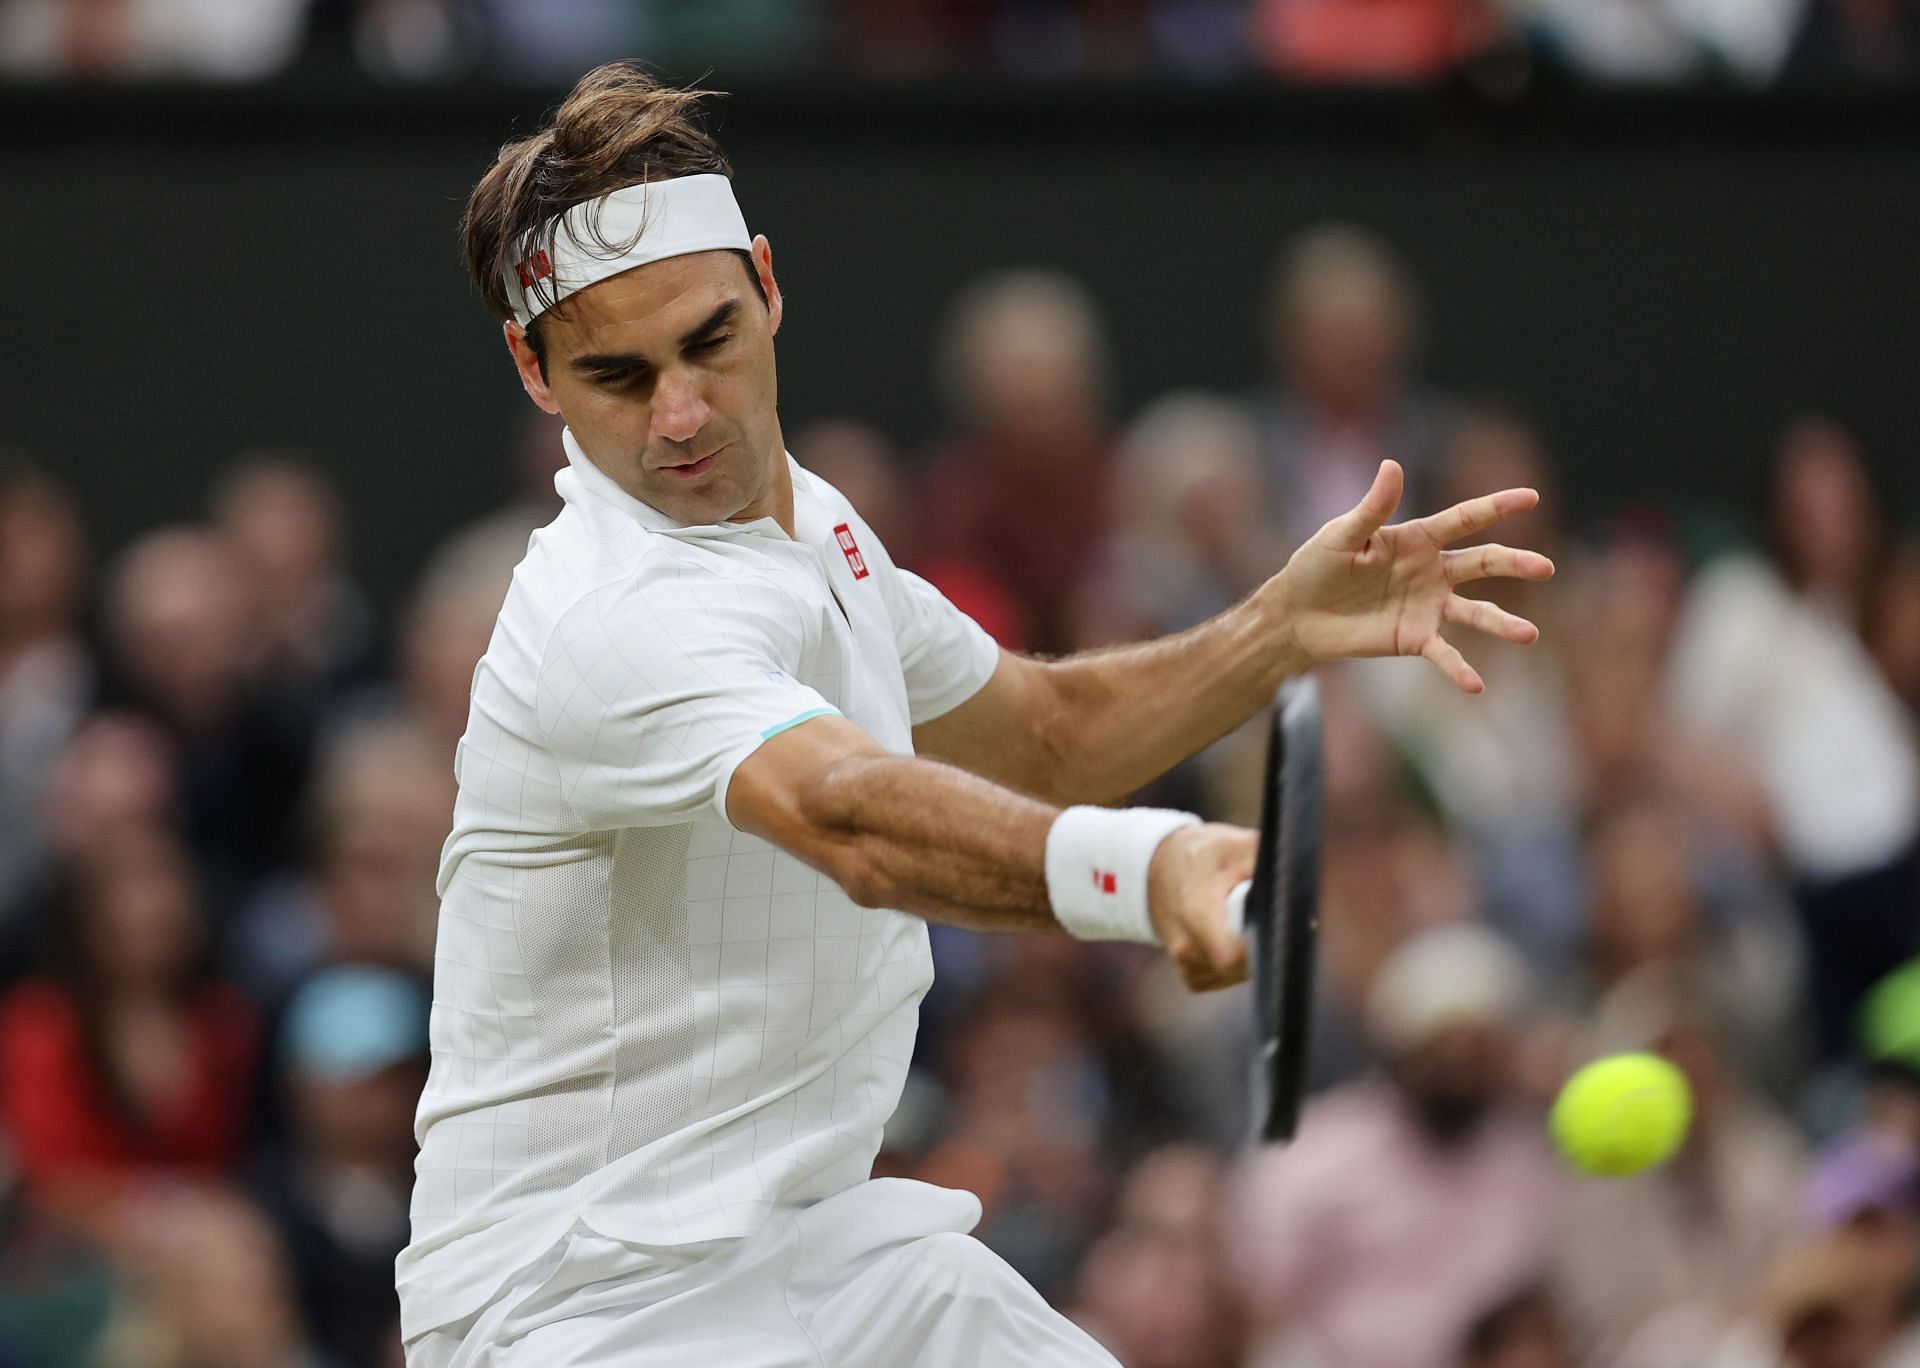 Roger Federer hits a forehand at the 2021 Wimbledon Championships